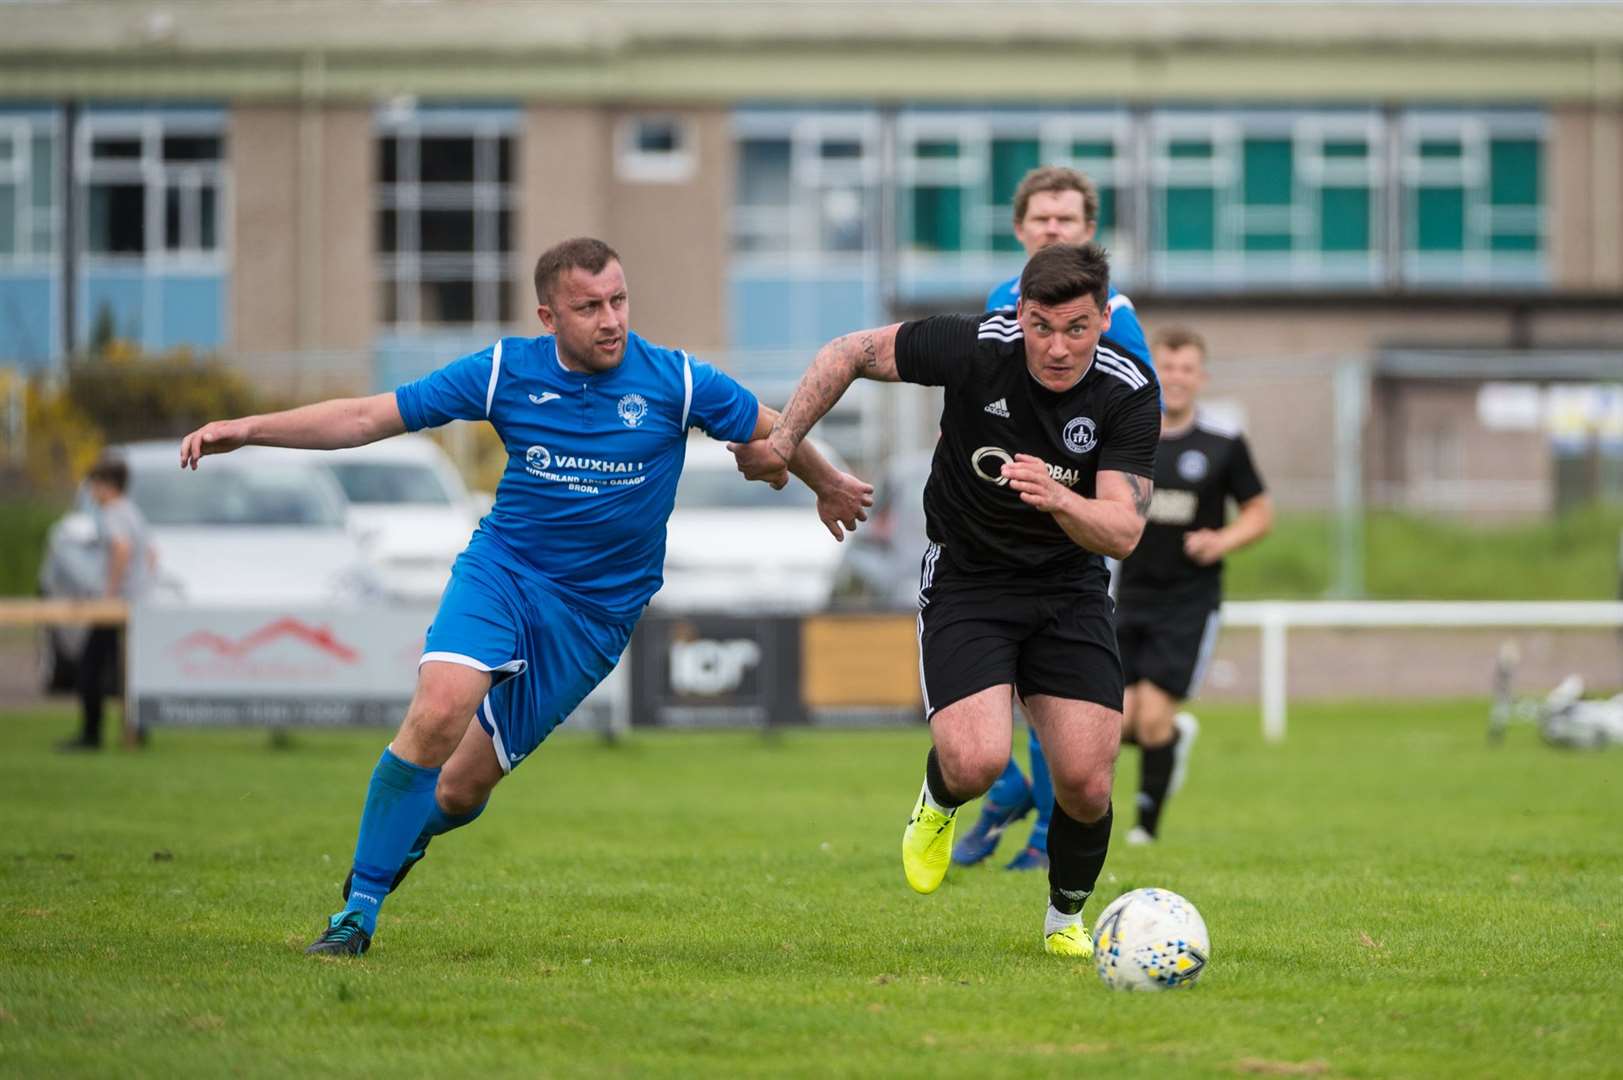 North Caley clubs will meet on Wednesday night to decide whether a break in the season is necessary.